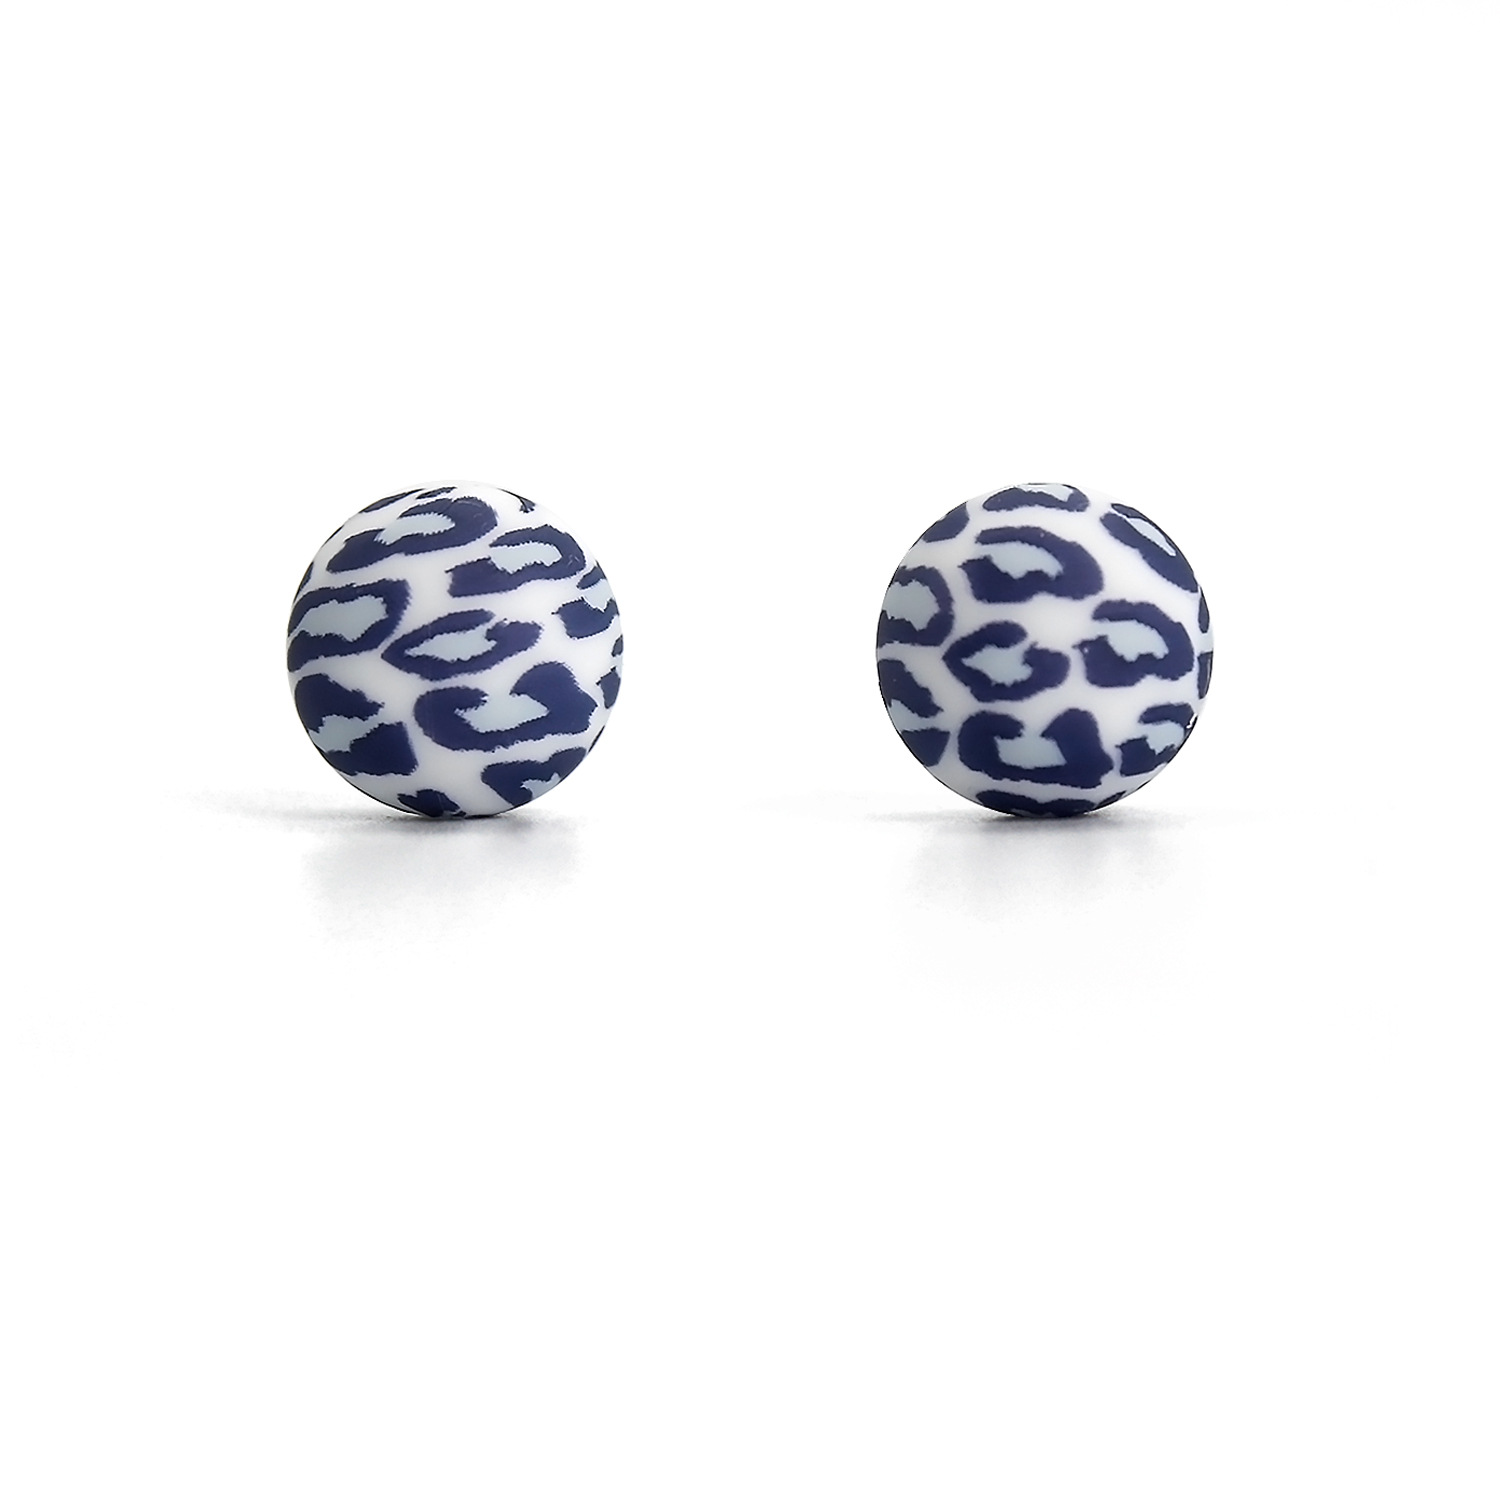 81. White and blue leopard print